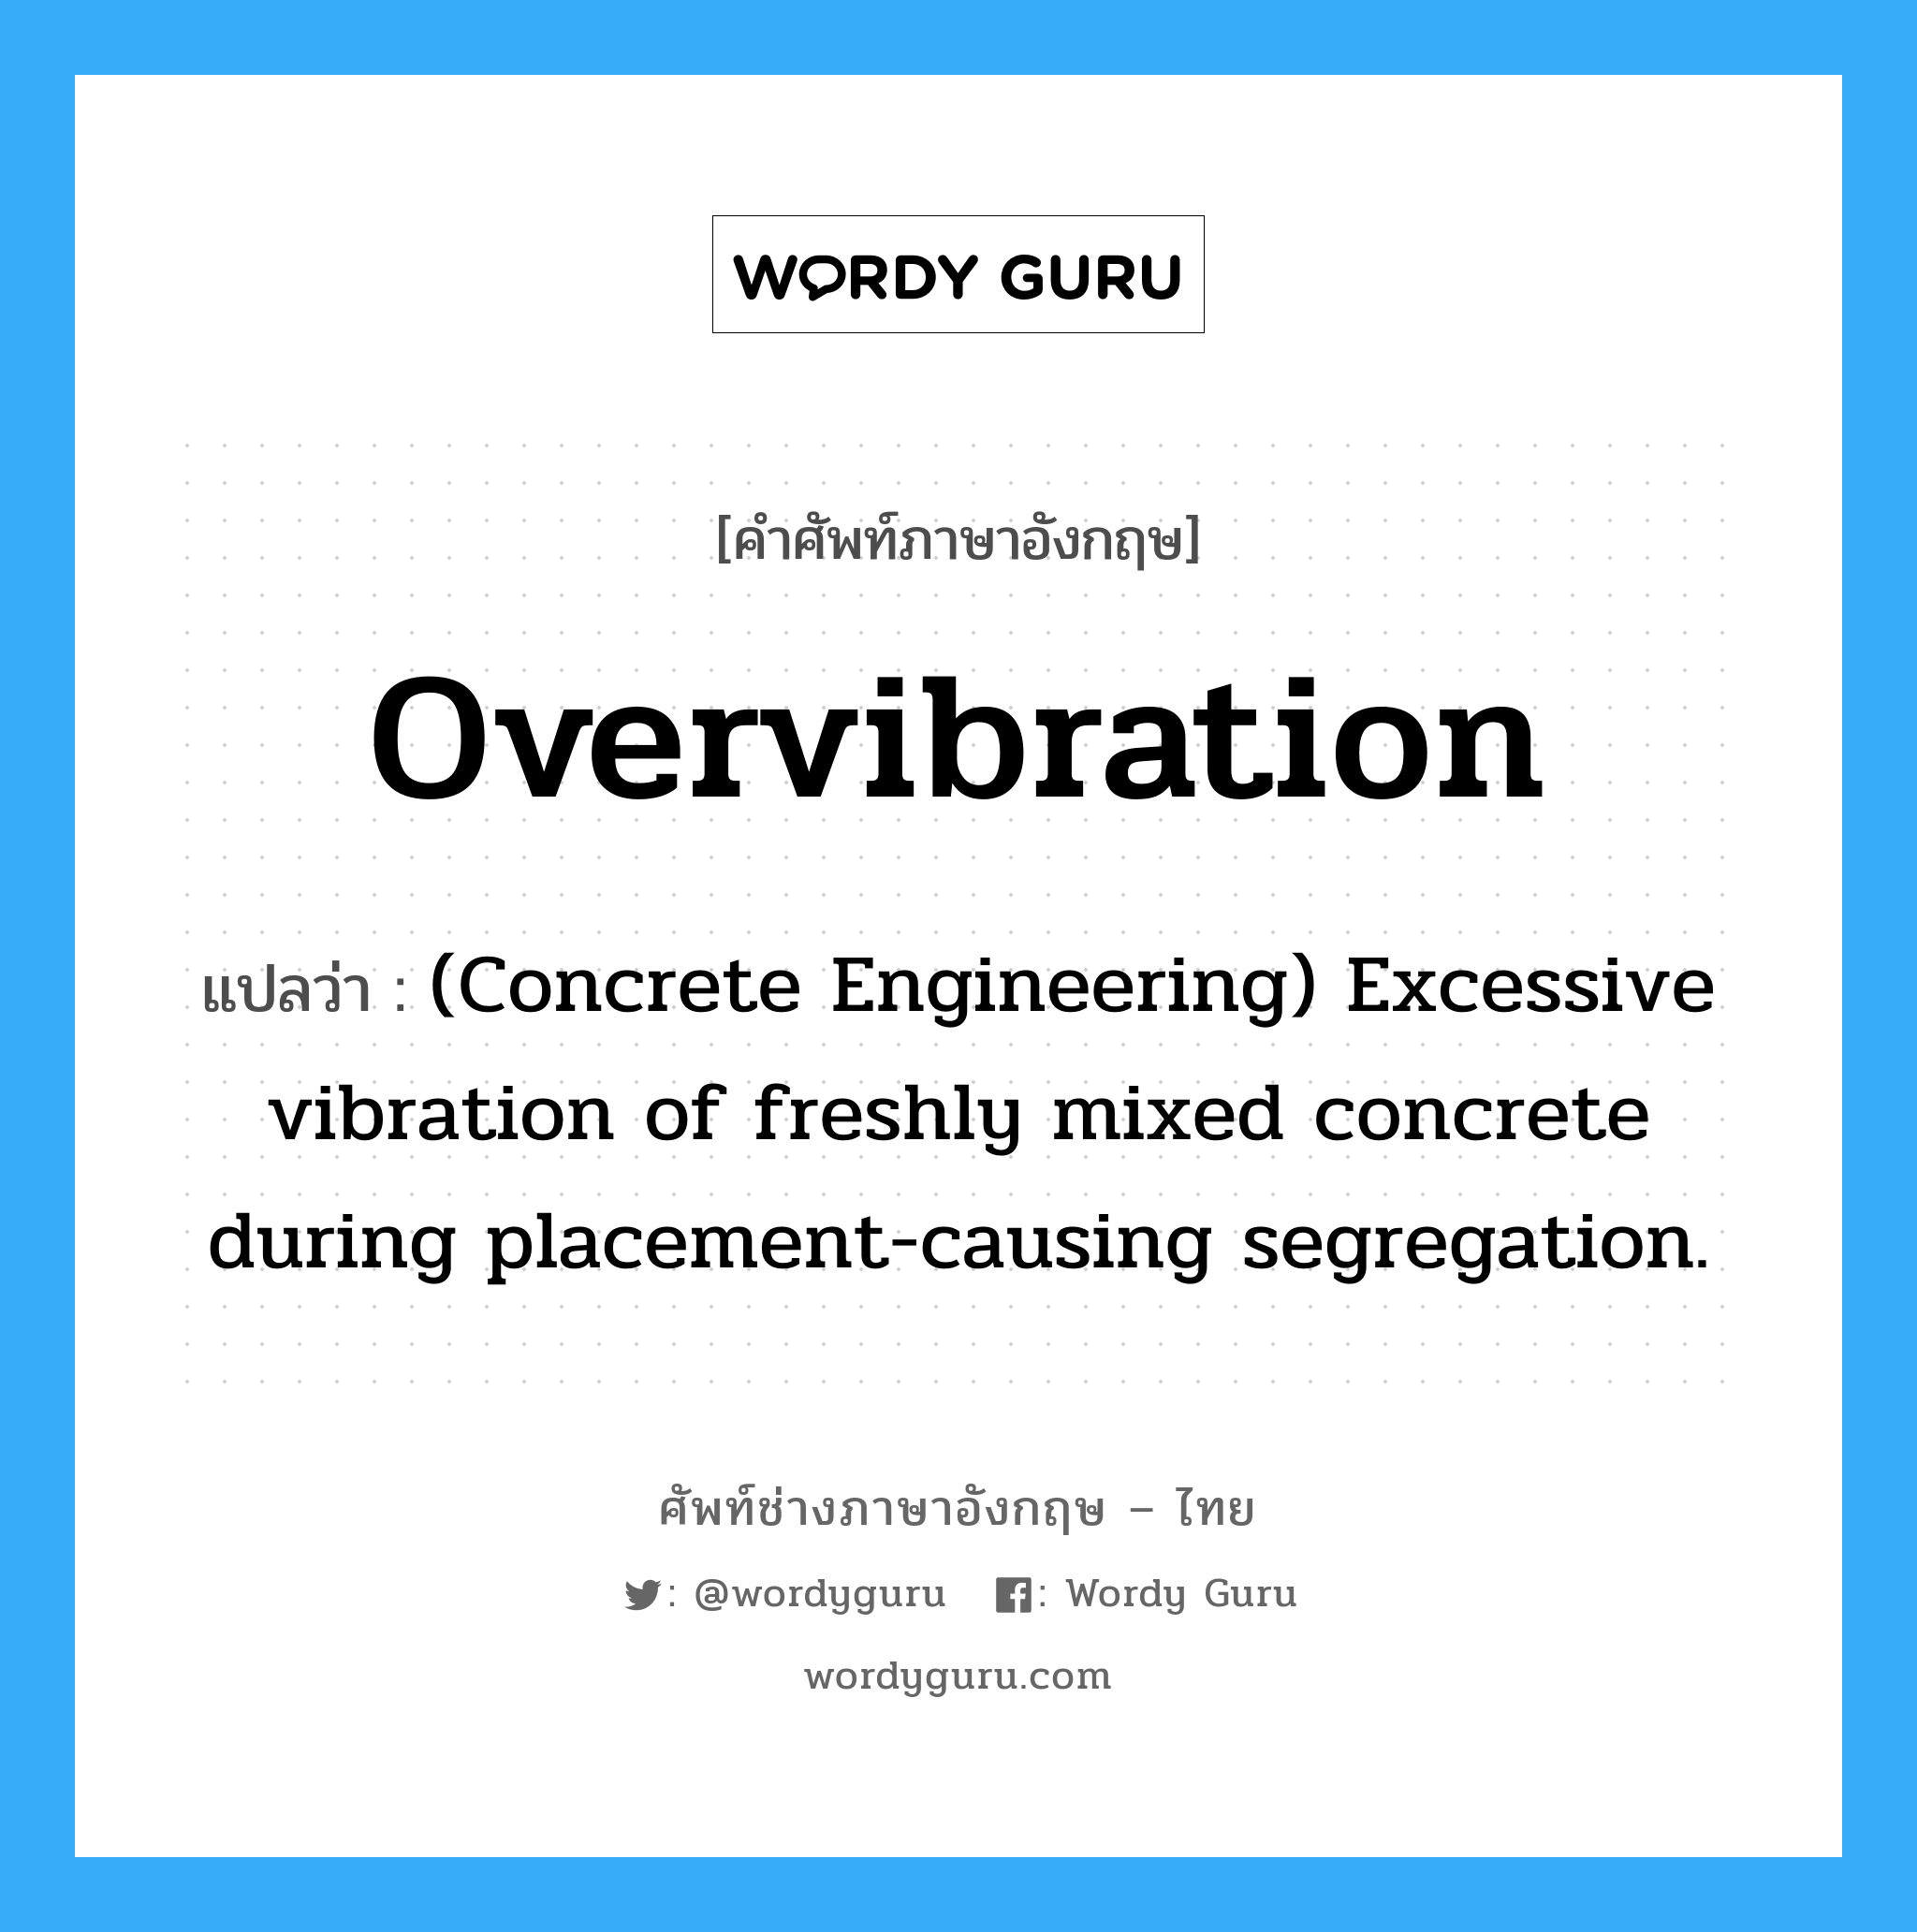 Overvibration แปลว่า?, คำศัพท์ช่างภาษาอังกฤษ - ไทย Overvibration คำศัพท์ภาษาอังกฤษ Overvibration แปลว่า (Concrete Engineering) Excessive vibration of freshly mixed concrete during placement-causing segregation.